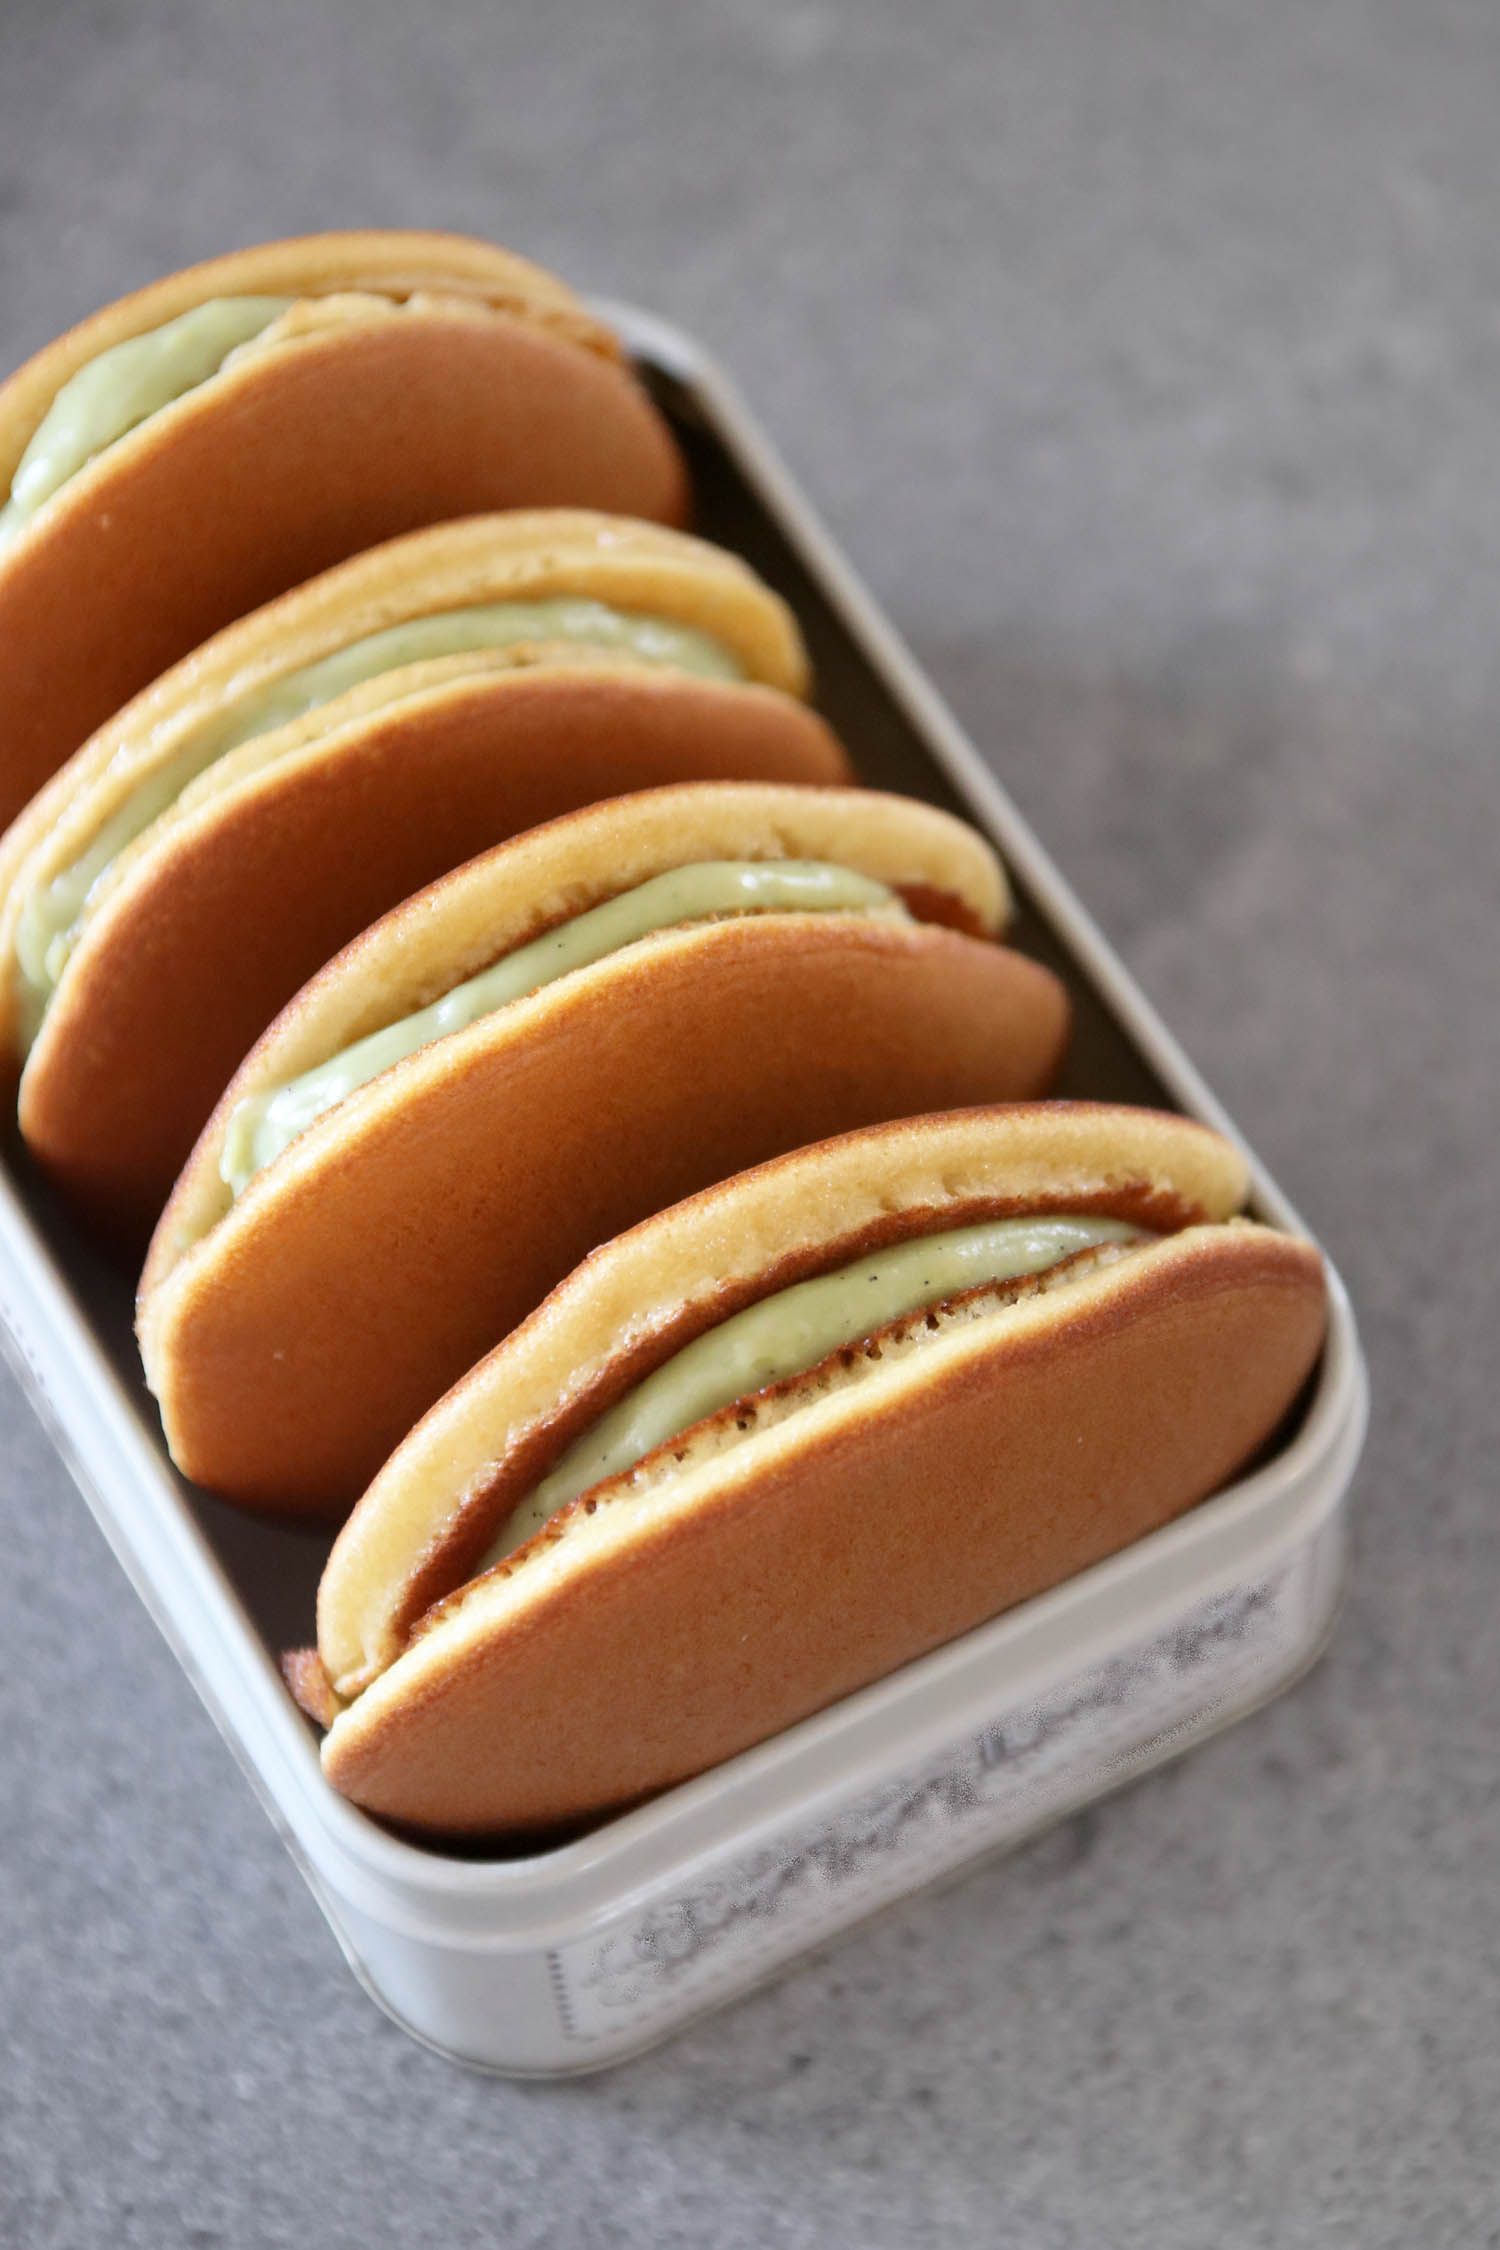 Dorayaki - Japanese Pancakes Filled with Matcha Pastry Cream | Lil' Cookie